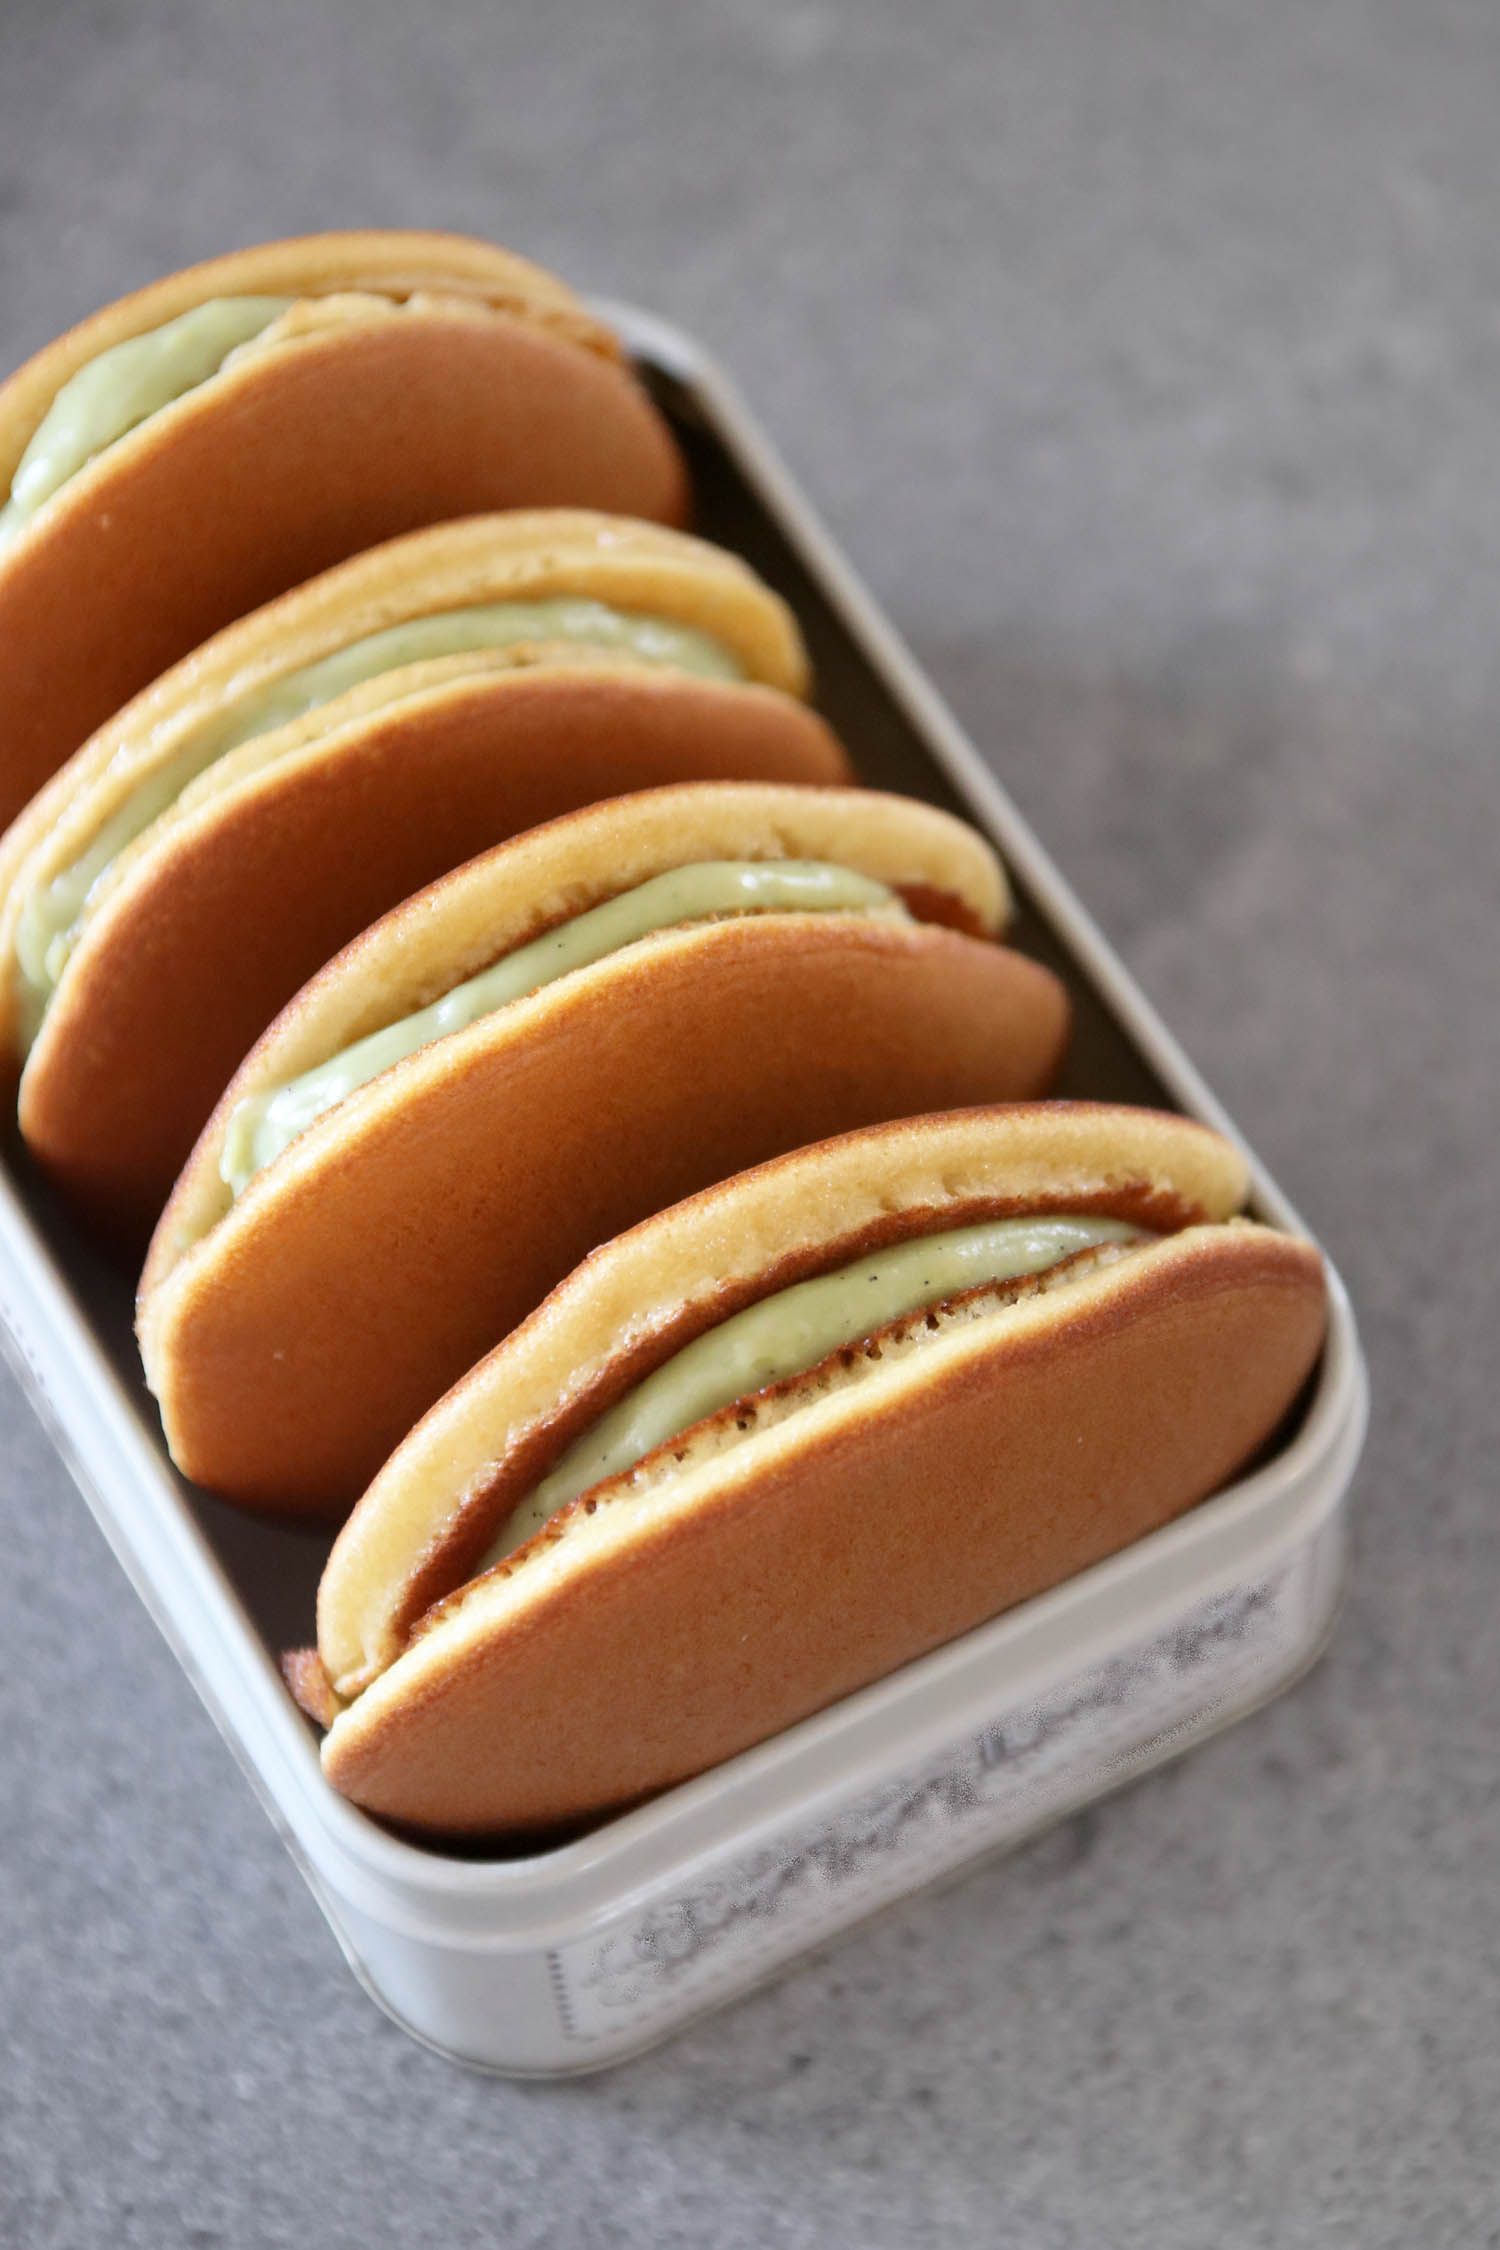 Dorayaki - Japanese Pancakes Filled with Matcha Pastry Cream | Lil' Cookie